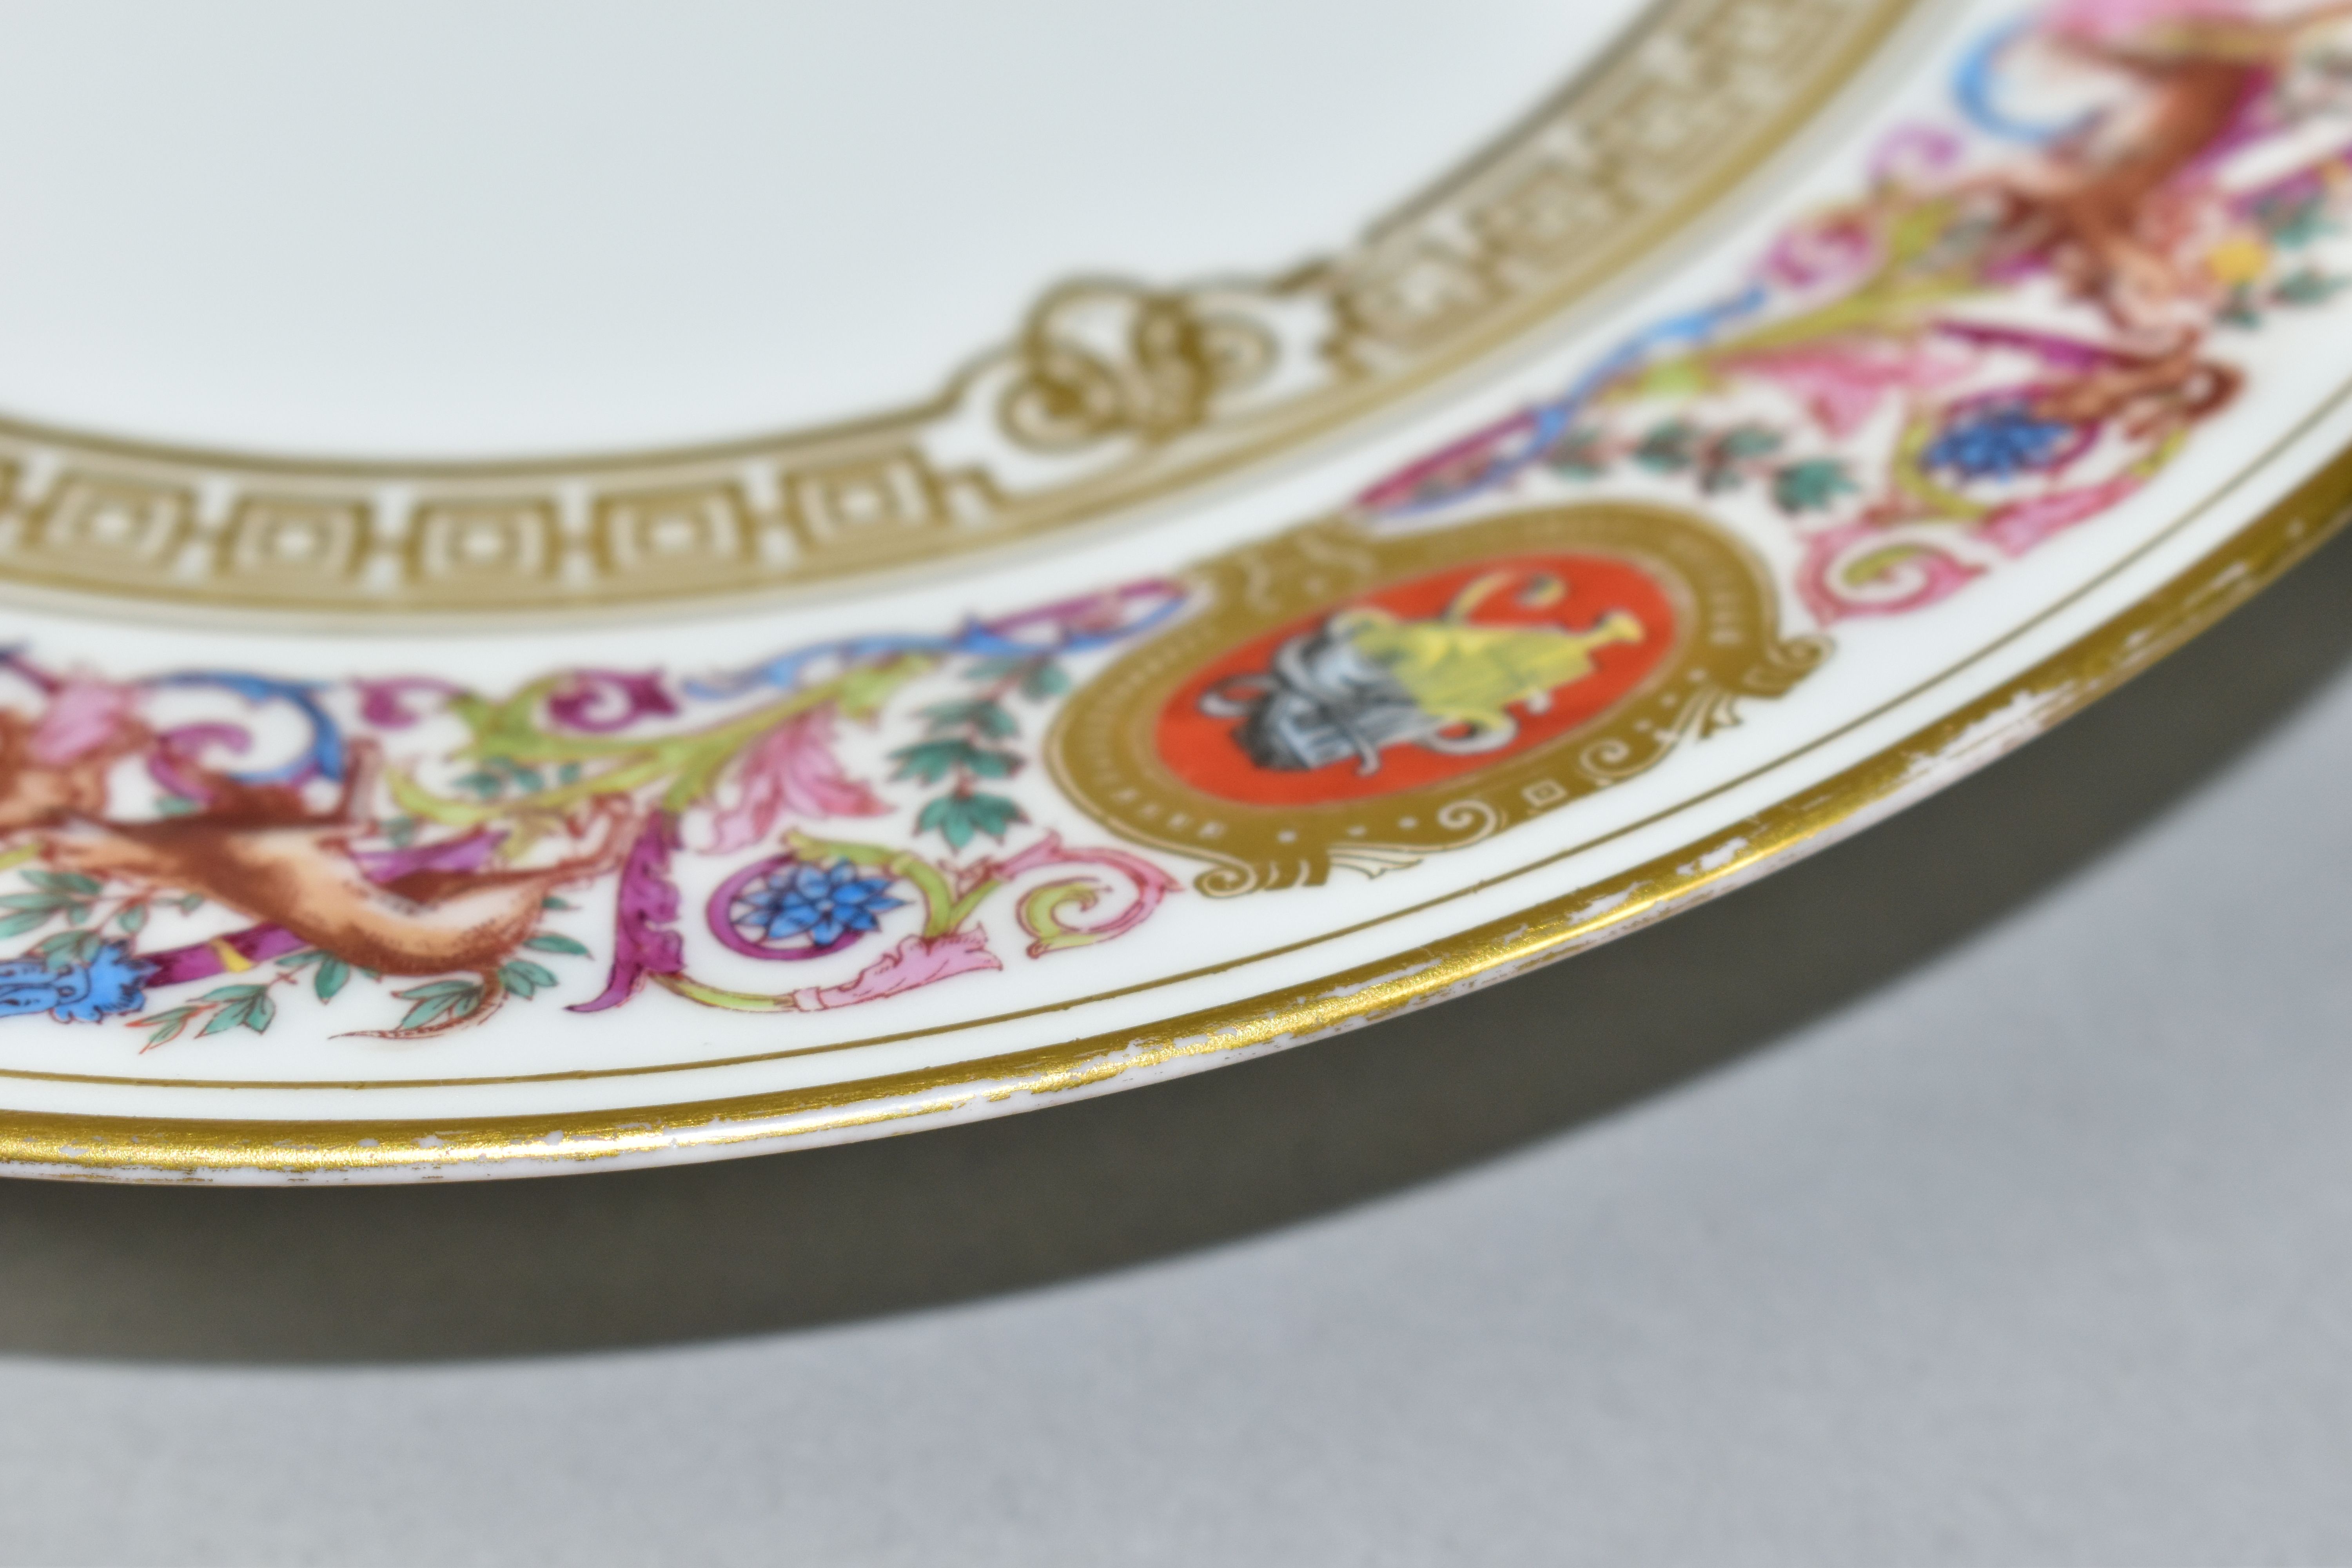 A SEVRES PORCELAIN DESSERT PLATE, from the Royal Hunting Service, featuring a scrolling border - Image 9 of 9